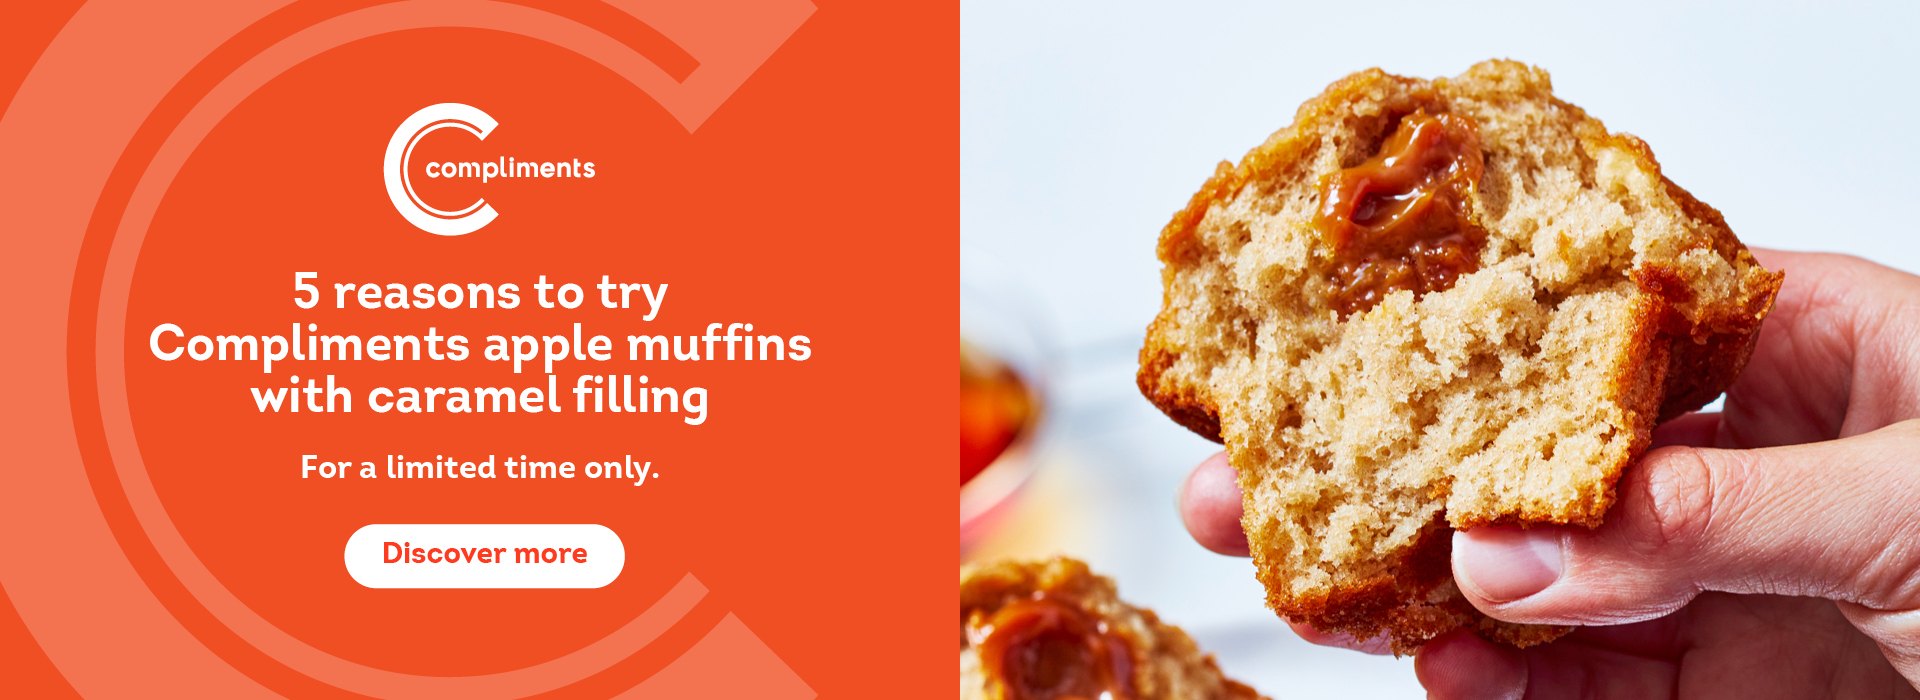 Text Reading 'Compliments. 5 reasons to try Compliments apple muffins with caramel filling. For a limited time only. Click on 'Discover more' button.'